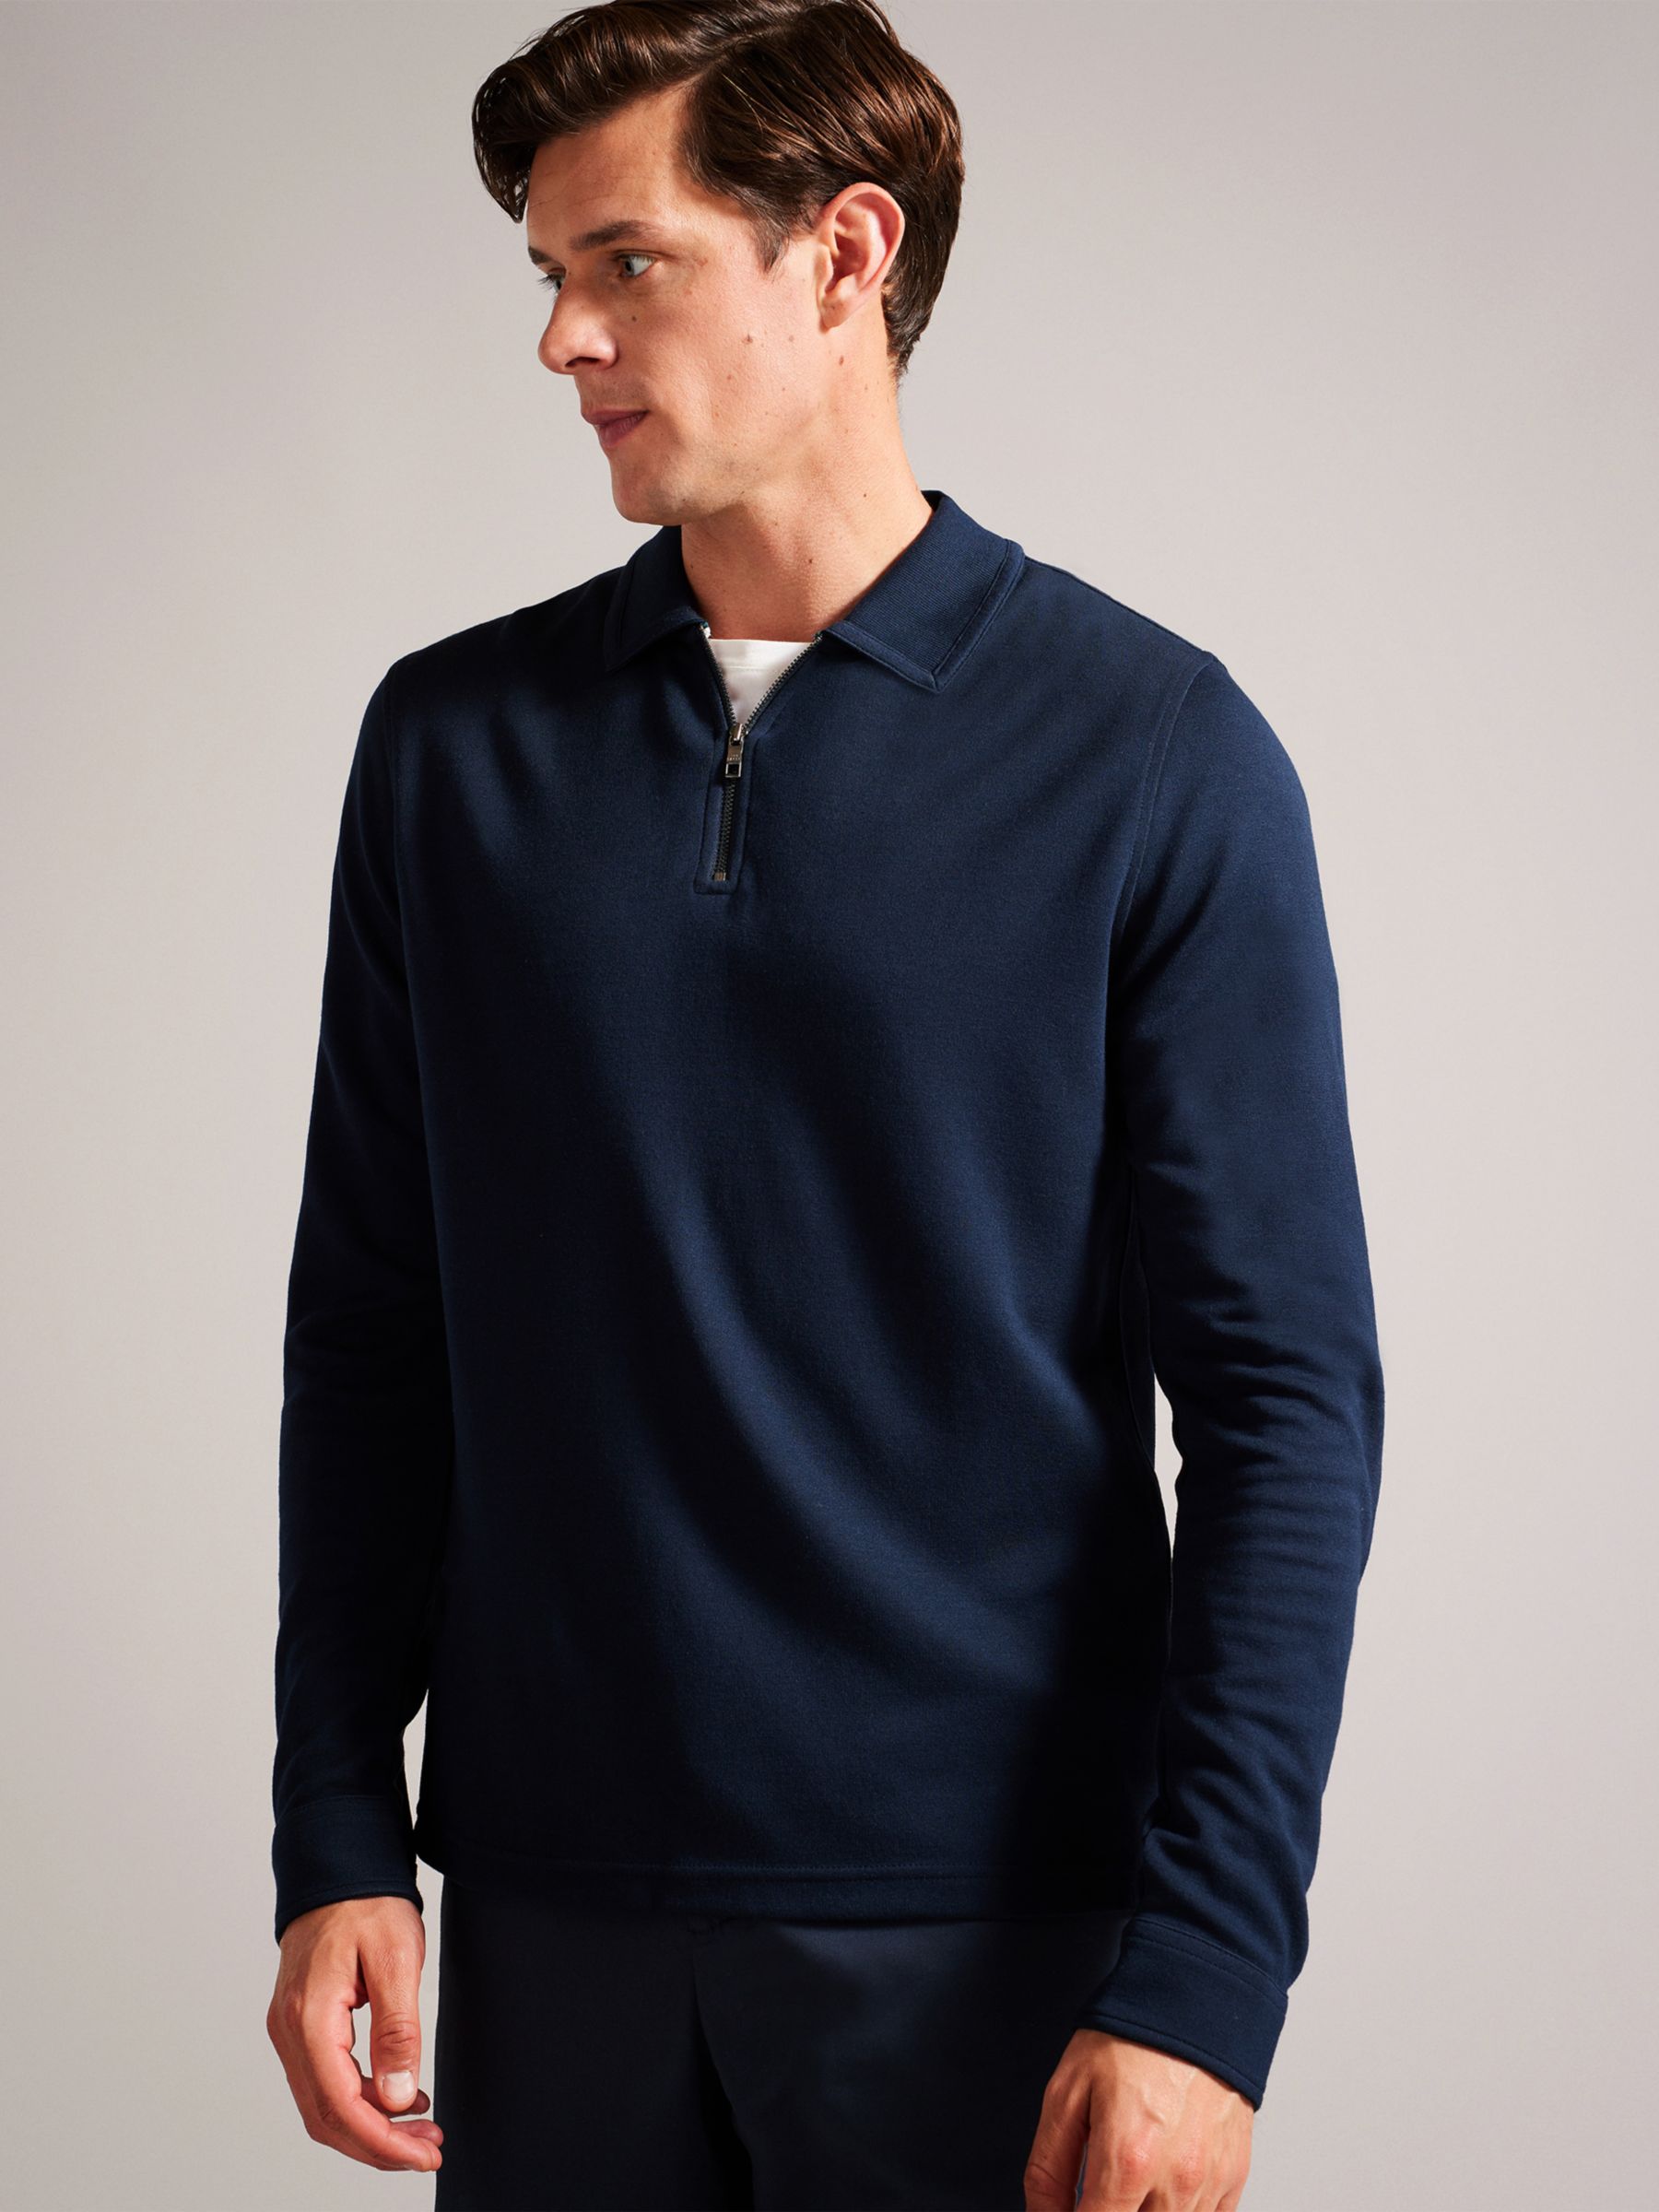 Ted Baker Karpol Long Sleeve Soft Touch Polo Top, Blue Navy, S